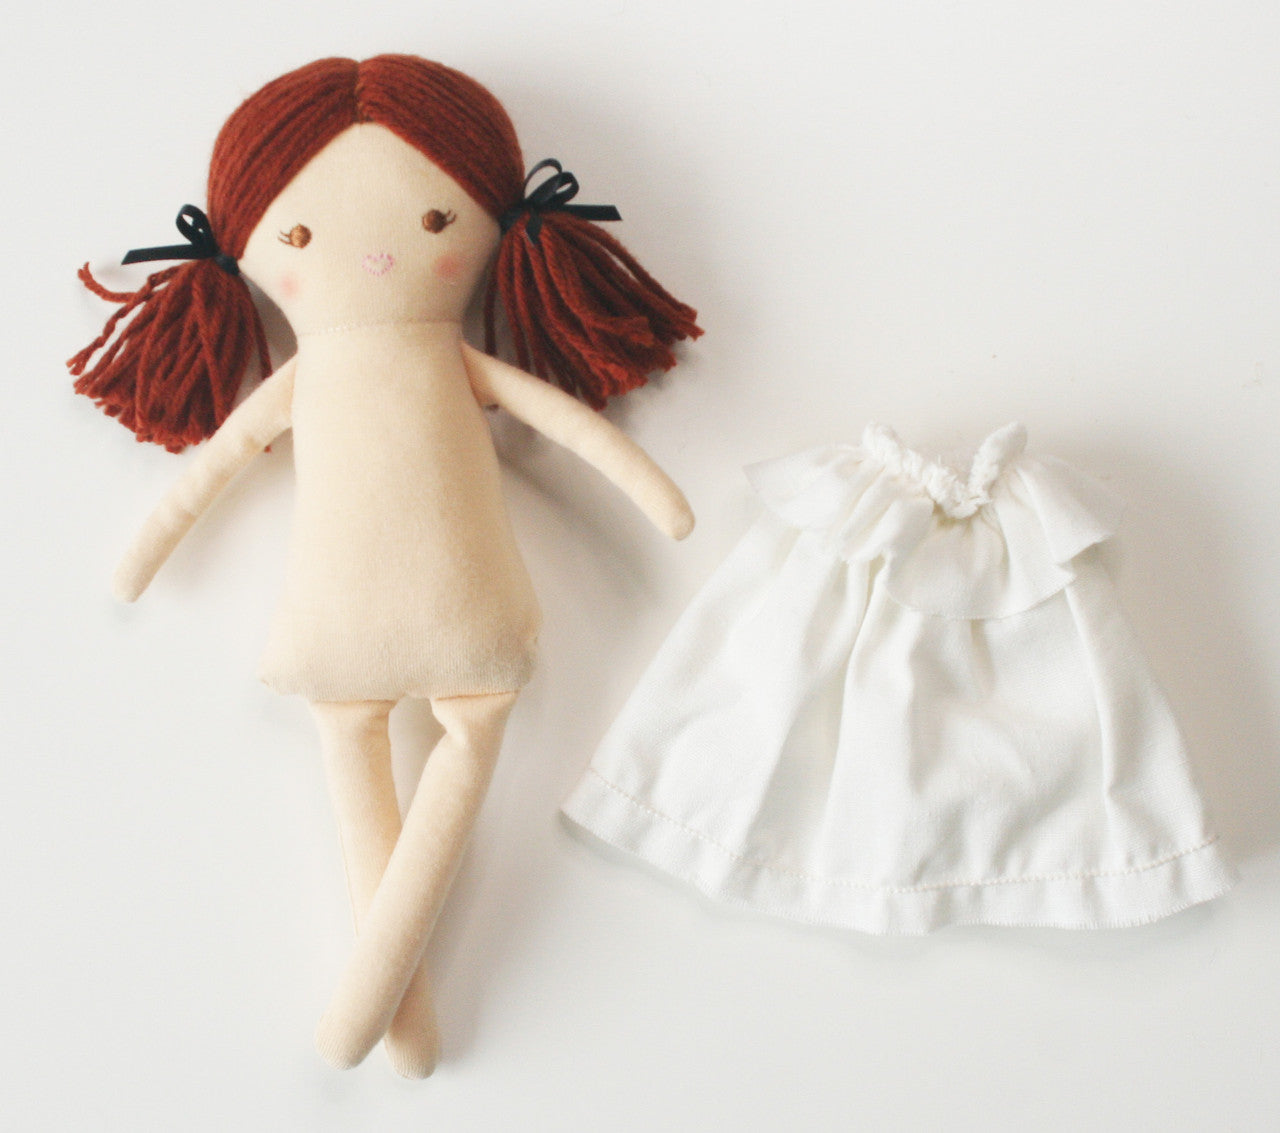 cloth doll with a dress beside it